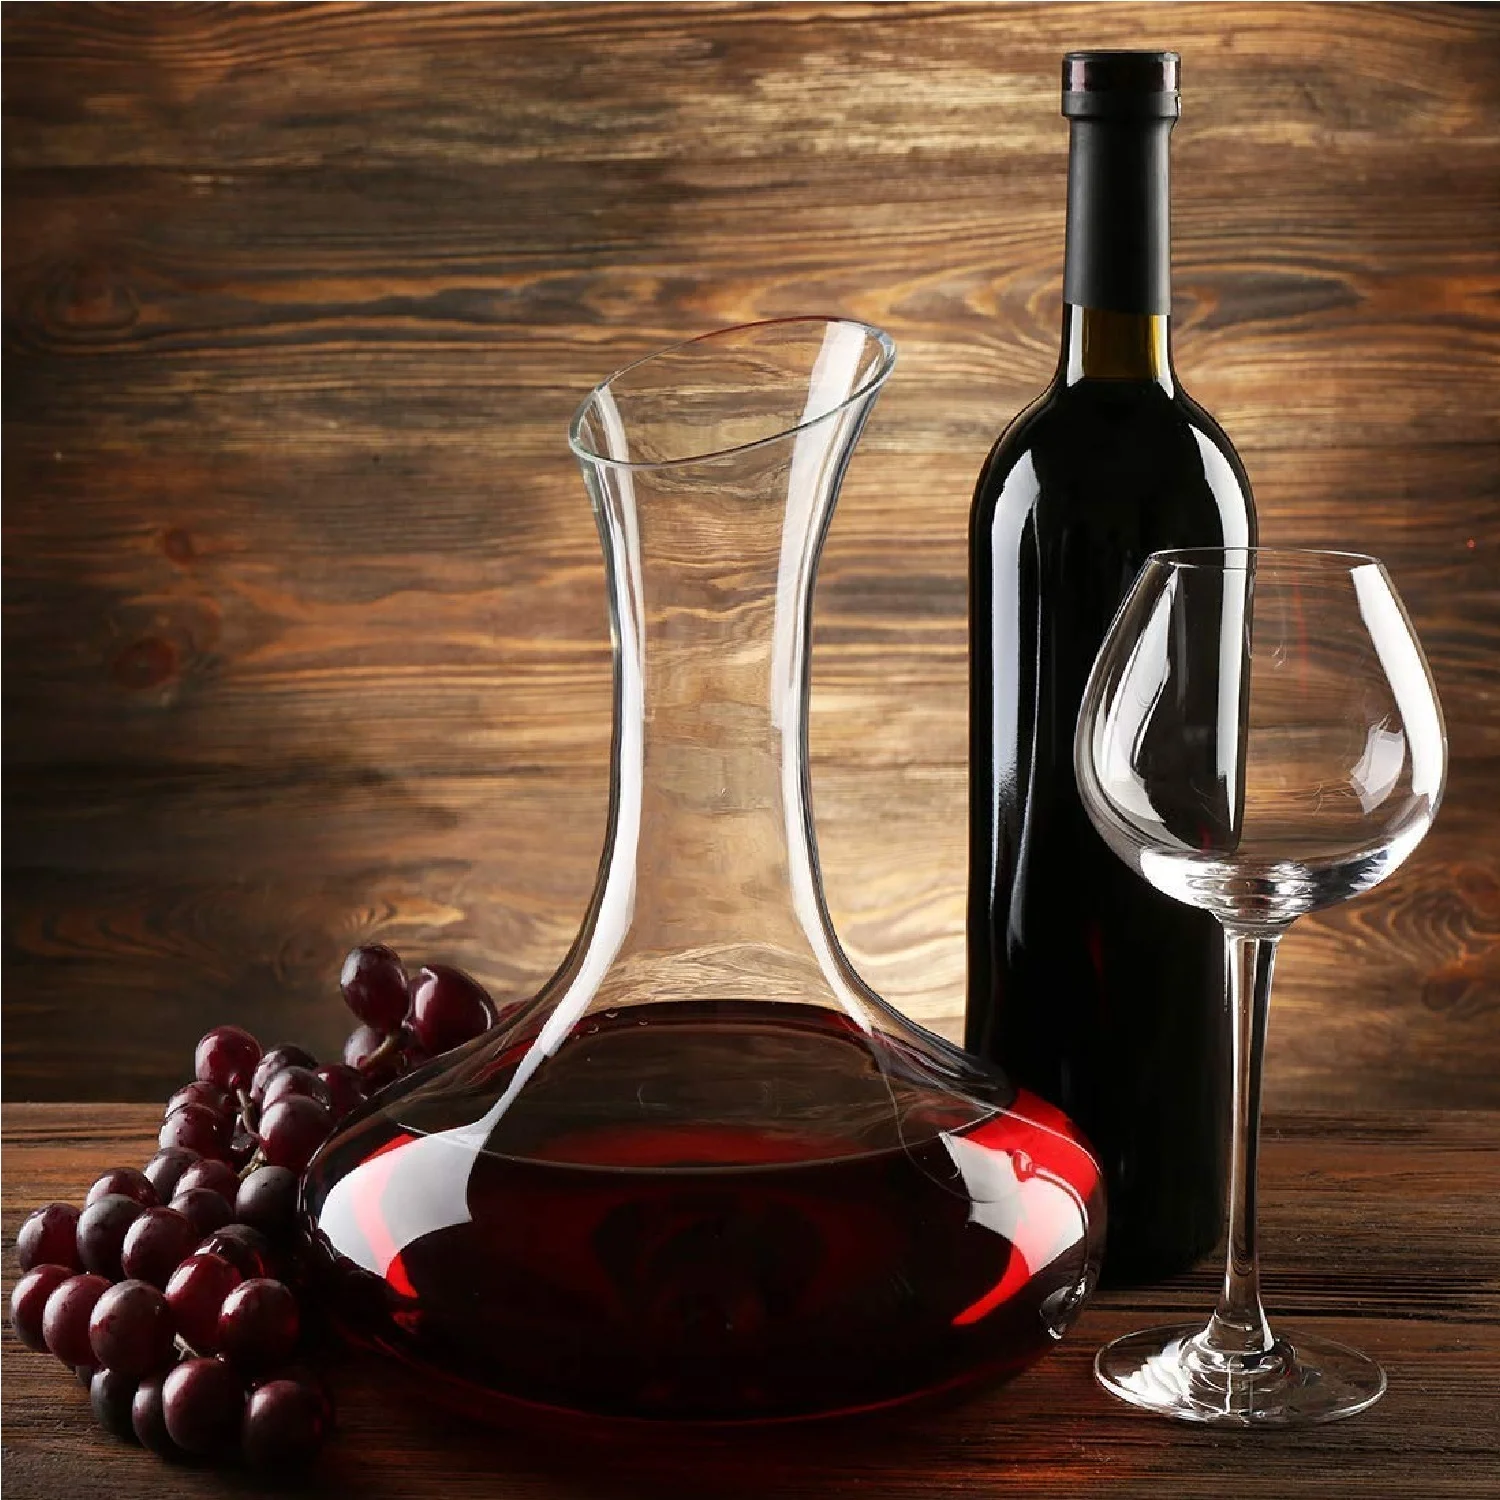 Buy Glass Wine Decanter, 1200ml Online at Discounted Price